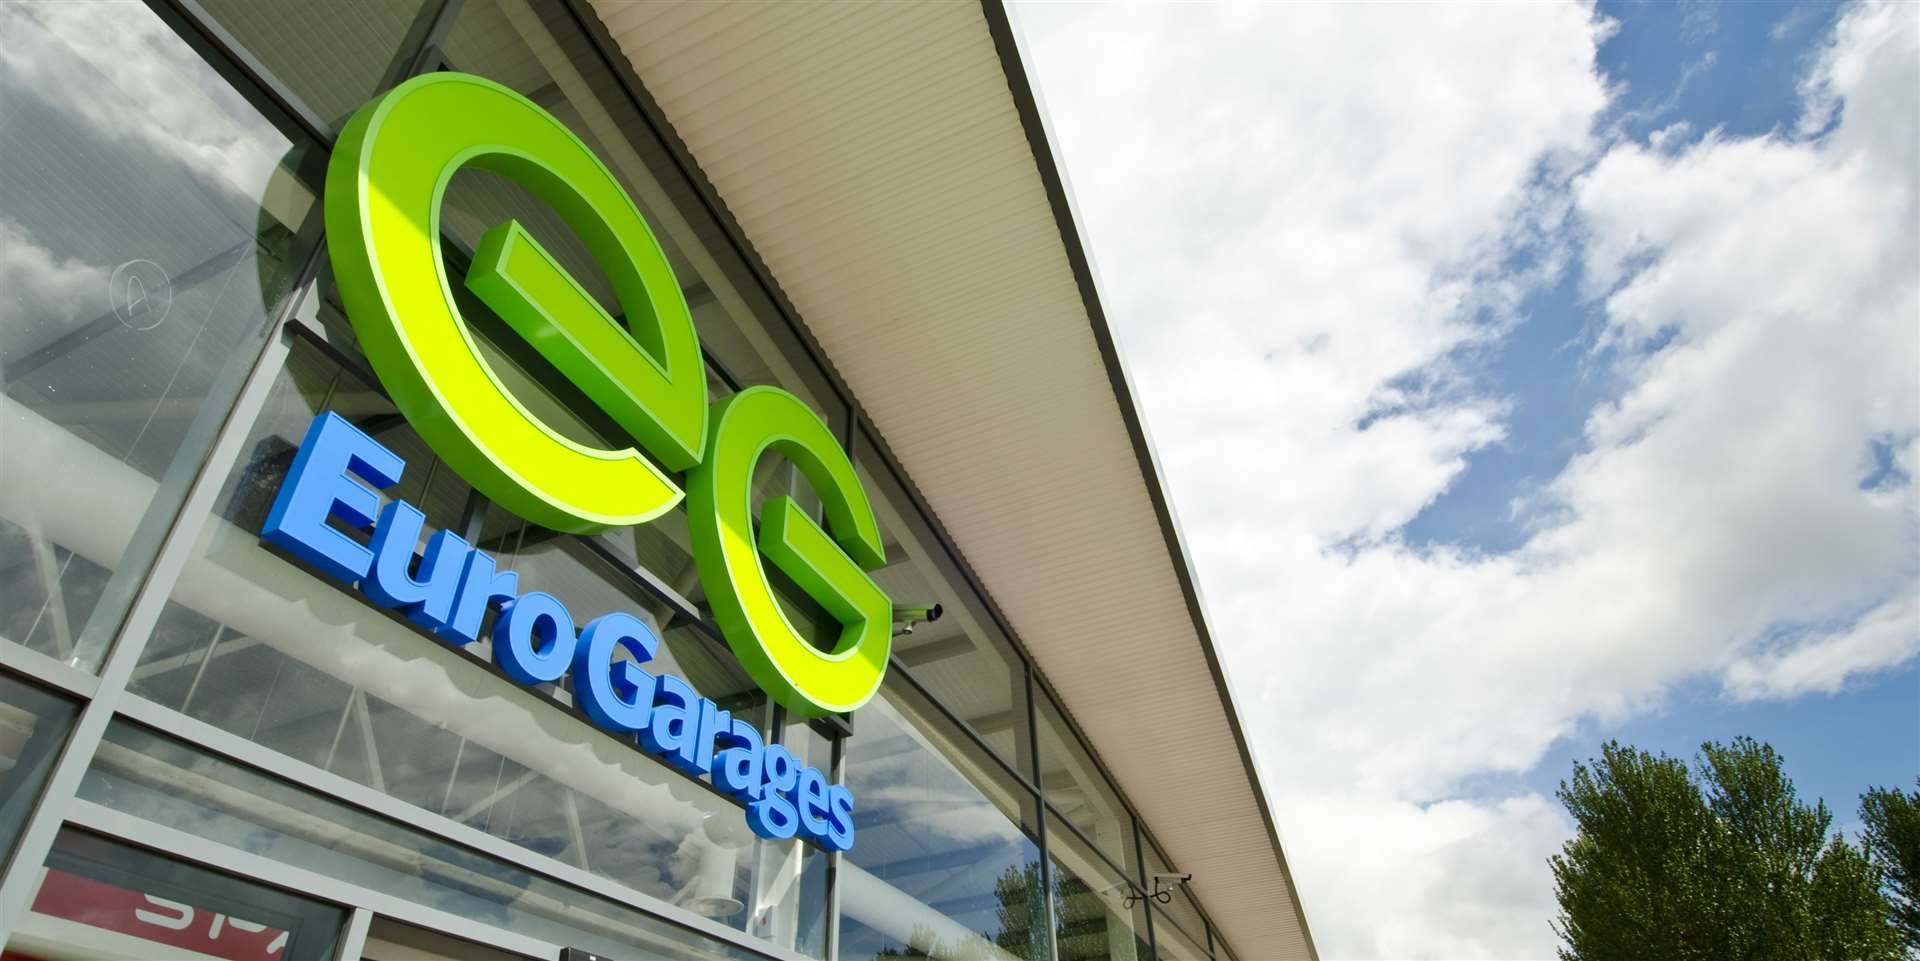 EG Group has almost 6,000 petrol stations and forecourts (EG/PA)